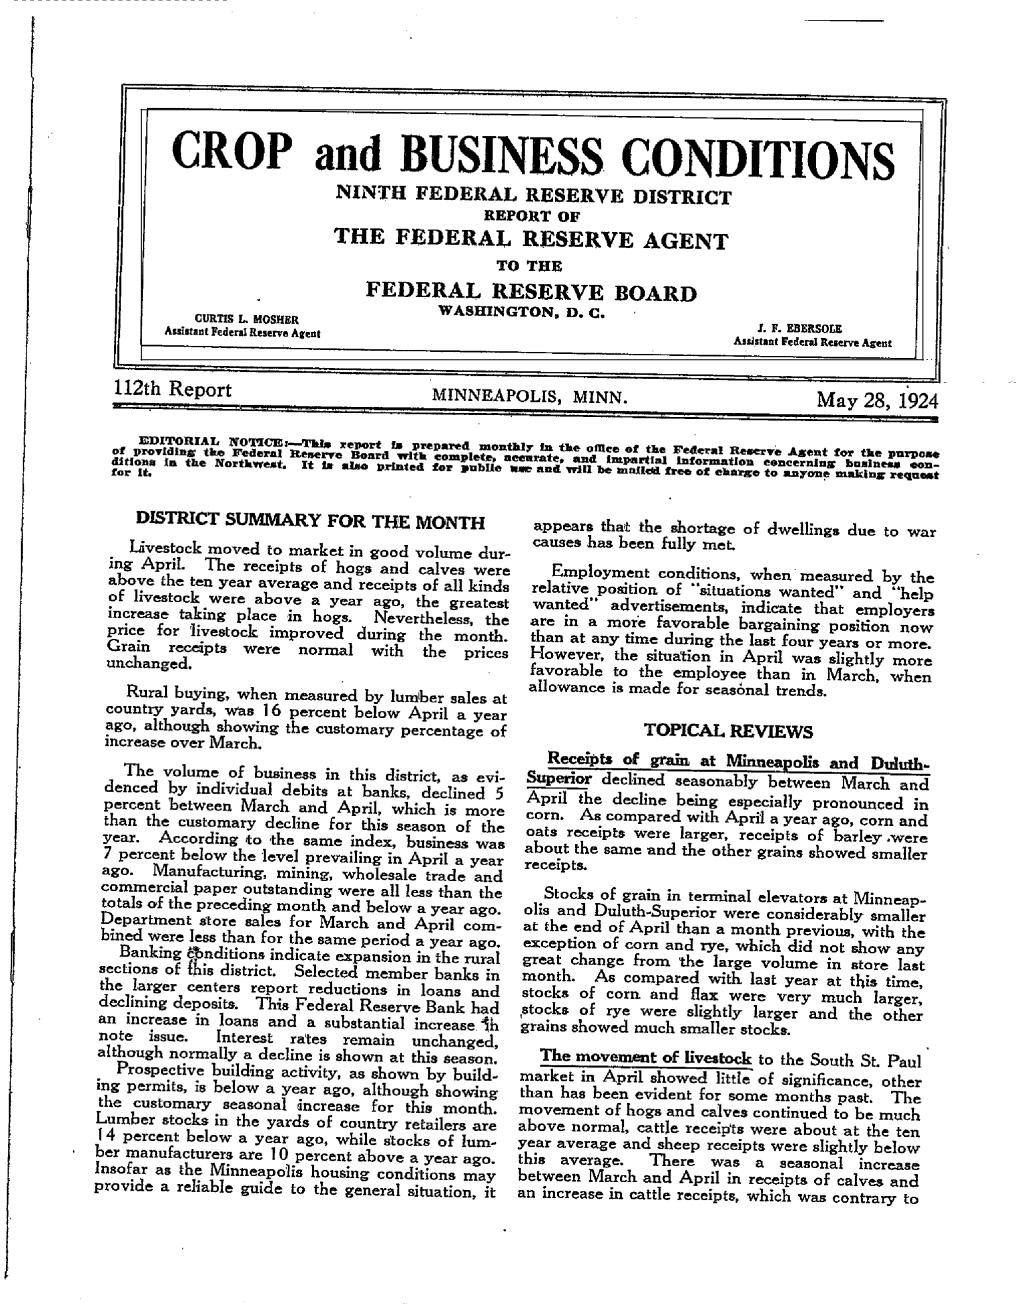 CROP and BUSINESSCONDITIONS